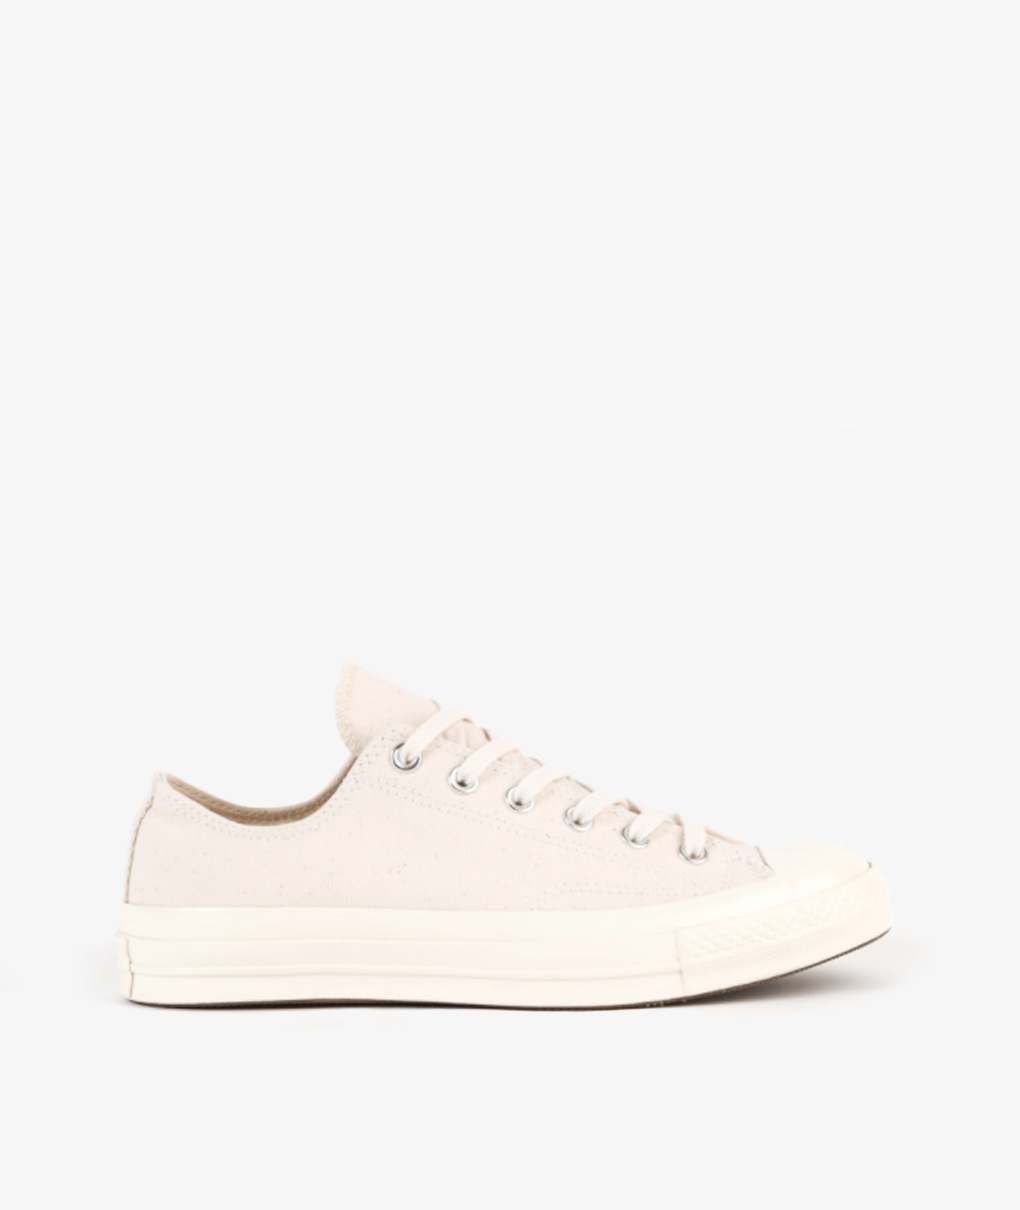 Norse Store - Chuck 70 Ox by Converse